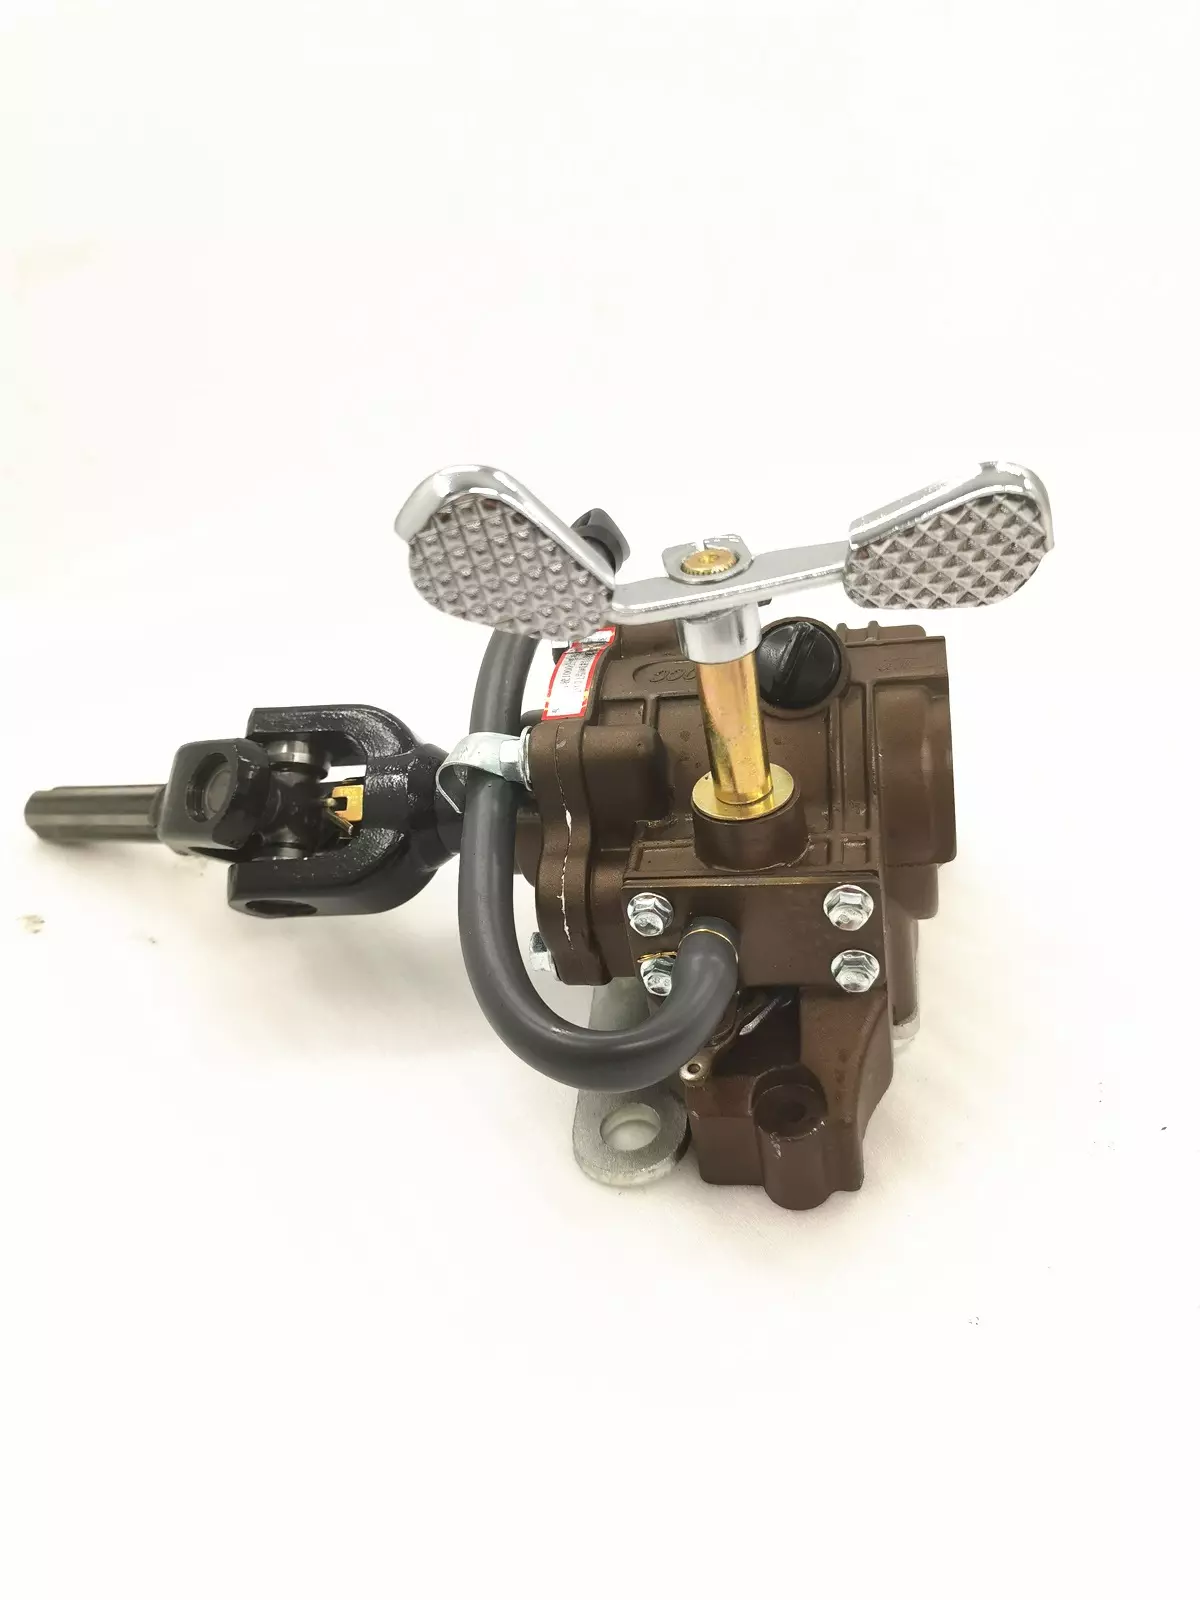 DAYANG exquisite ChuanYu 280 reverse gear box  for Lifan Engine Motor Trike 3 Wheel Motorcycle Tricycle with big size base plate